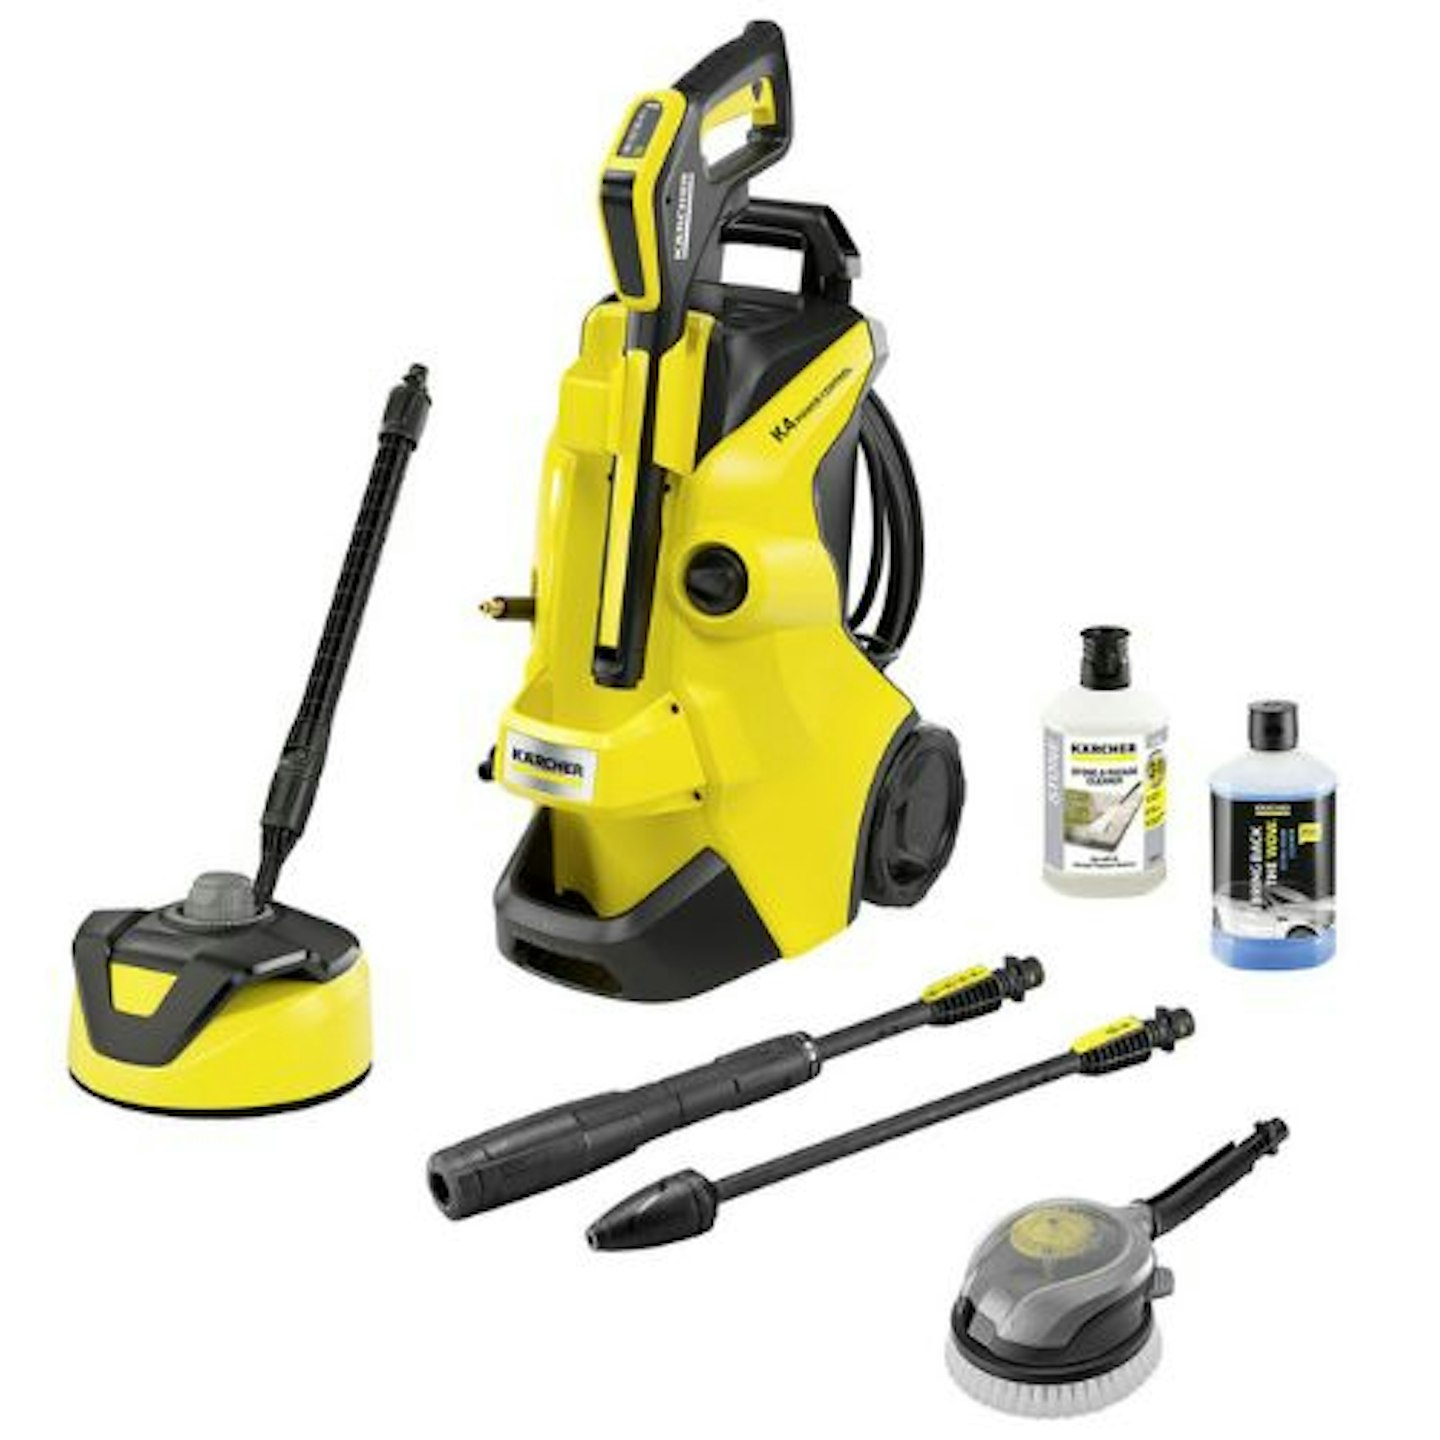 Karcher K4 Power Control Car and Home Pressure Washer